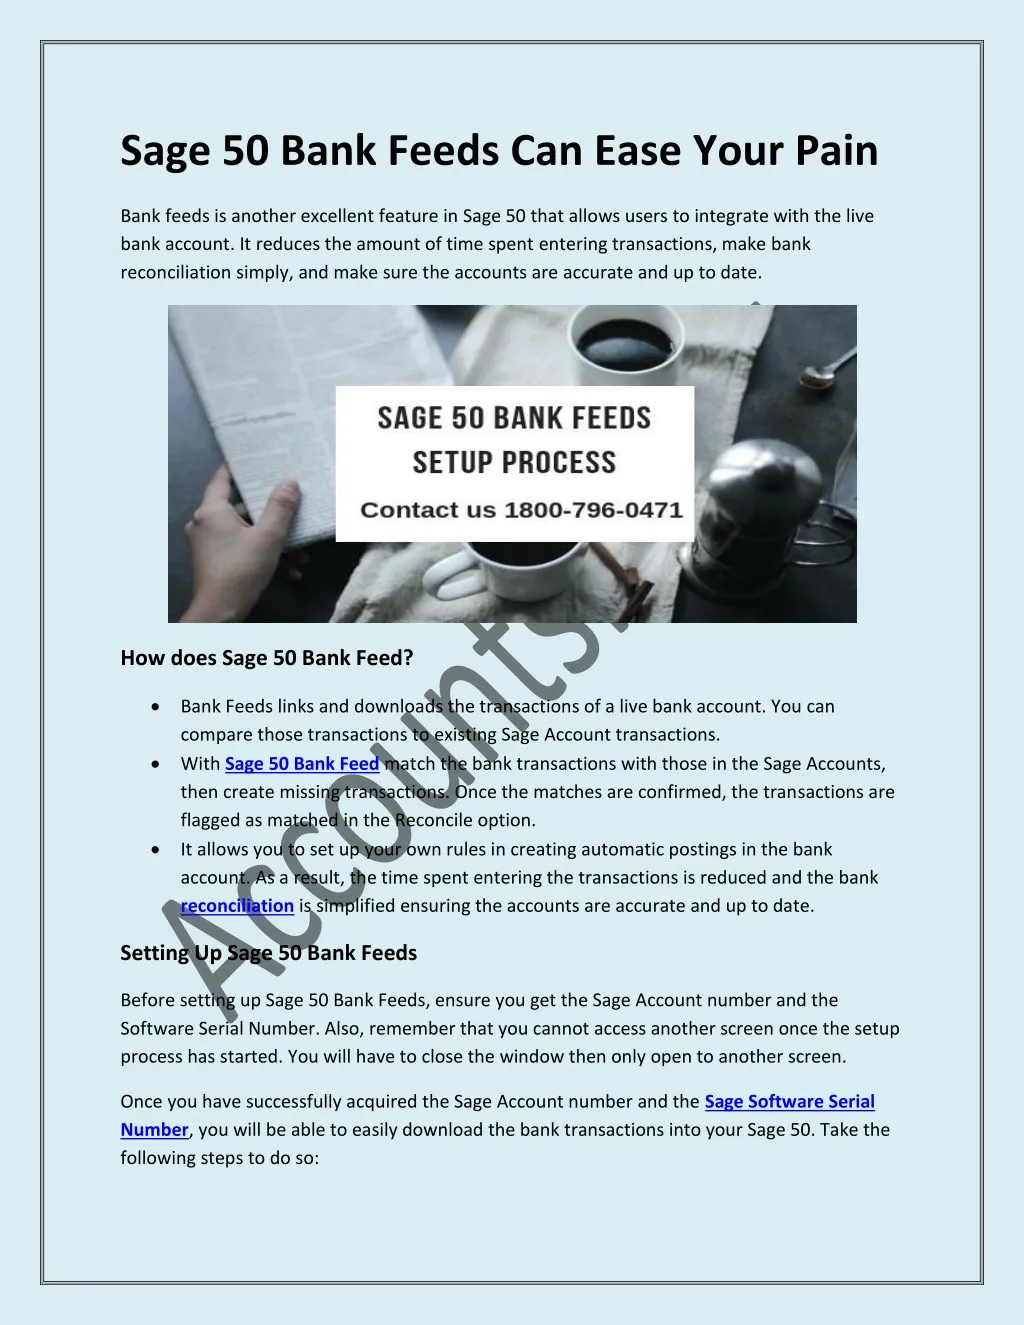 sage 50 bank feeds can ease your pain